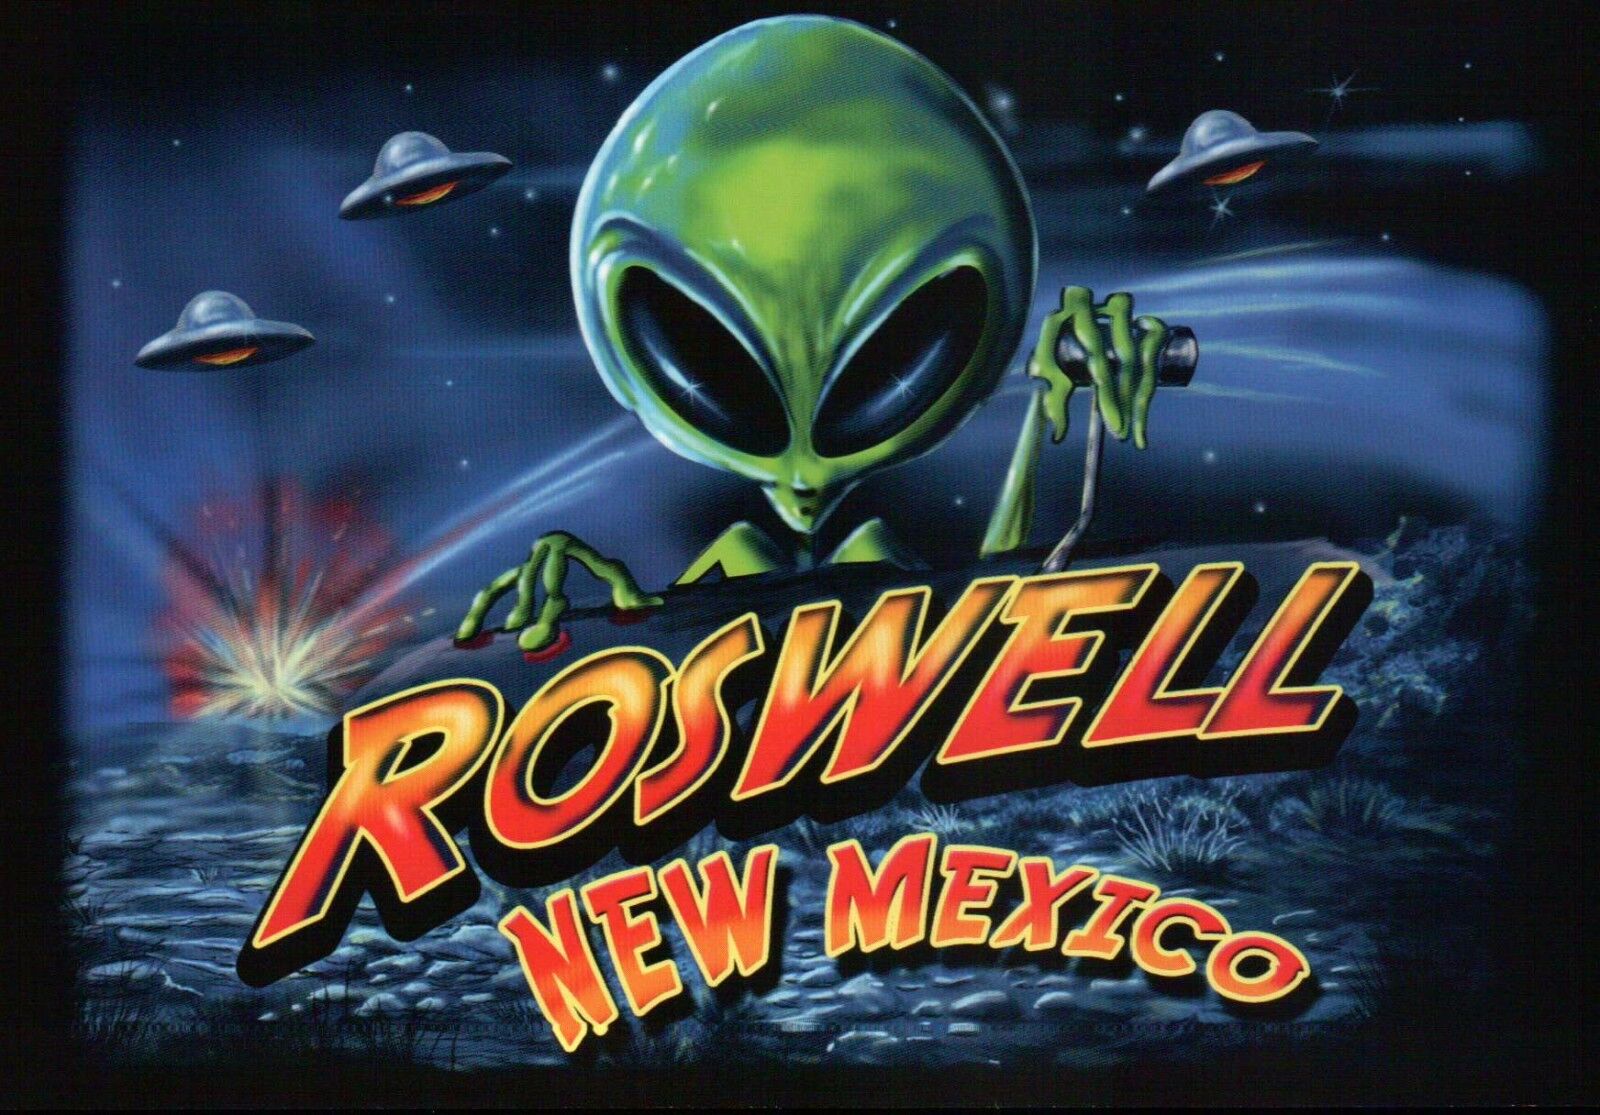 Roswell New Mexico, UFO Alien Little Green Men 1947 Military Cover Up ? Postcard